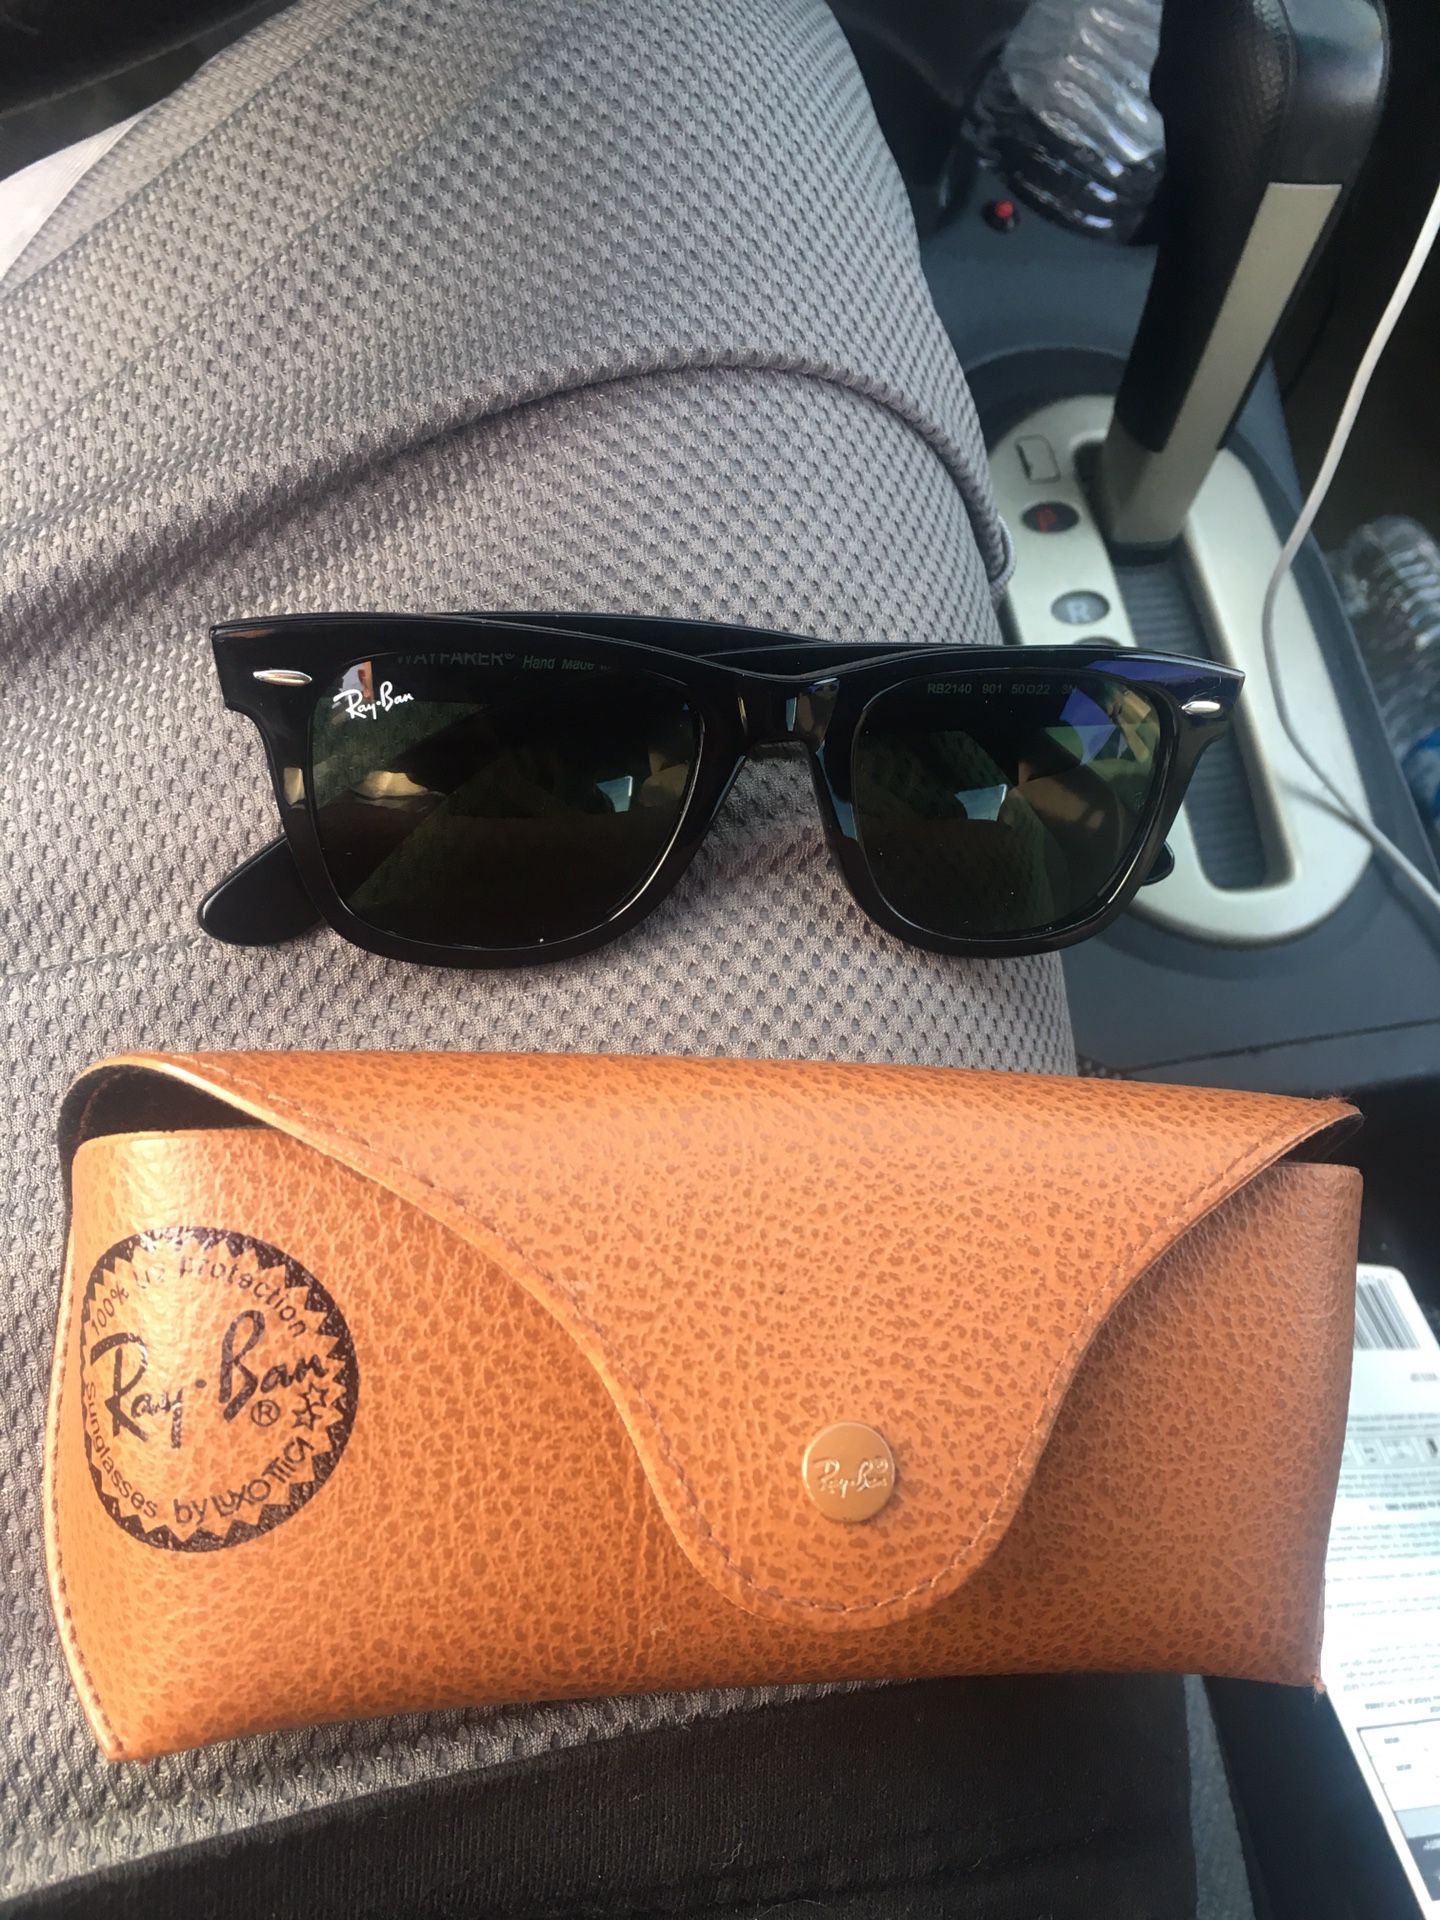 Chanel sunglasses for Sale in Torrance, CA - OfferUp